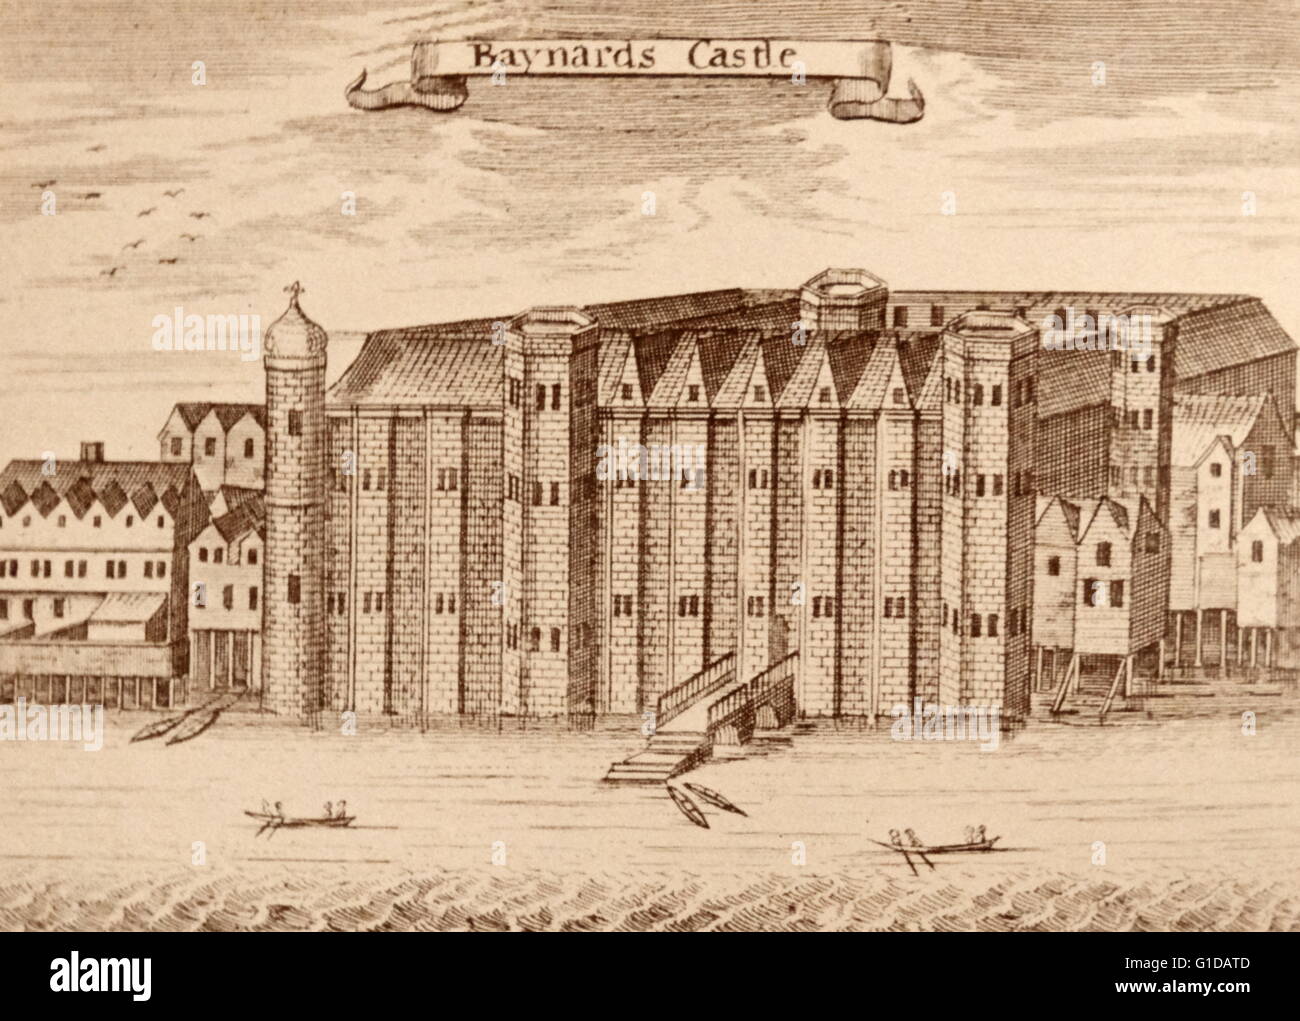 Baynard's Castle which stands on the Thames near Paul's Wharf. This was the London residence of Richard's mother, Cicely Neville. It was often used by Richard in the months leading up to his accession to the throne. Stock Photo